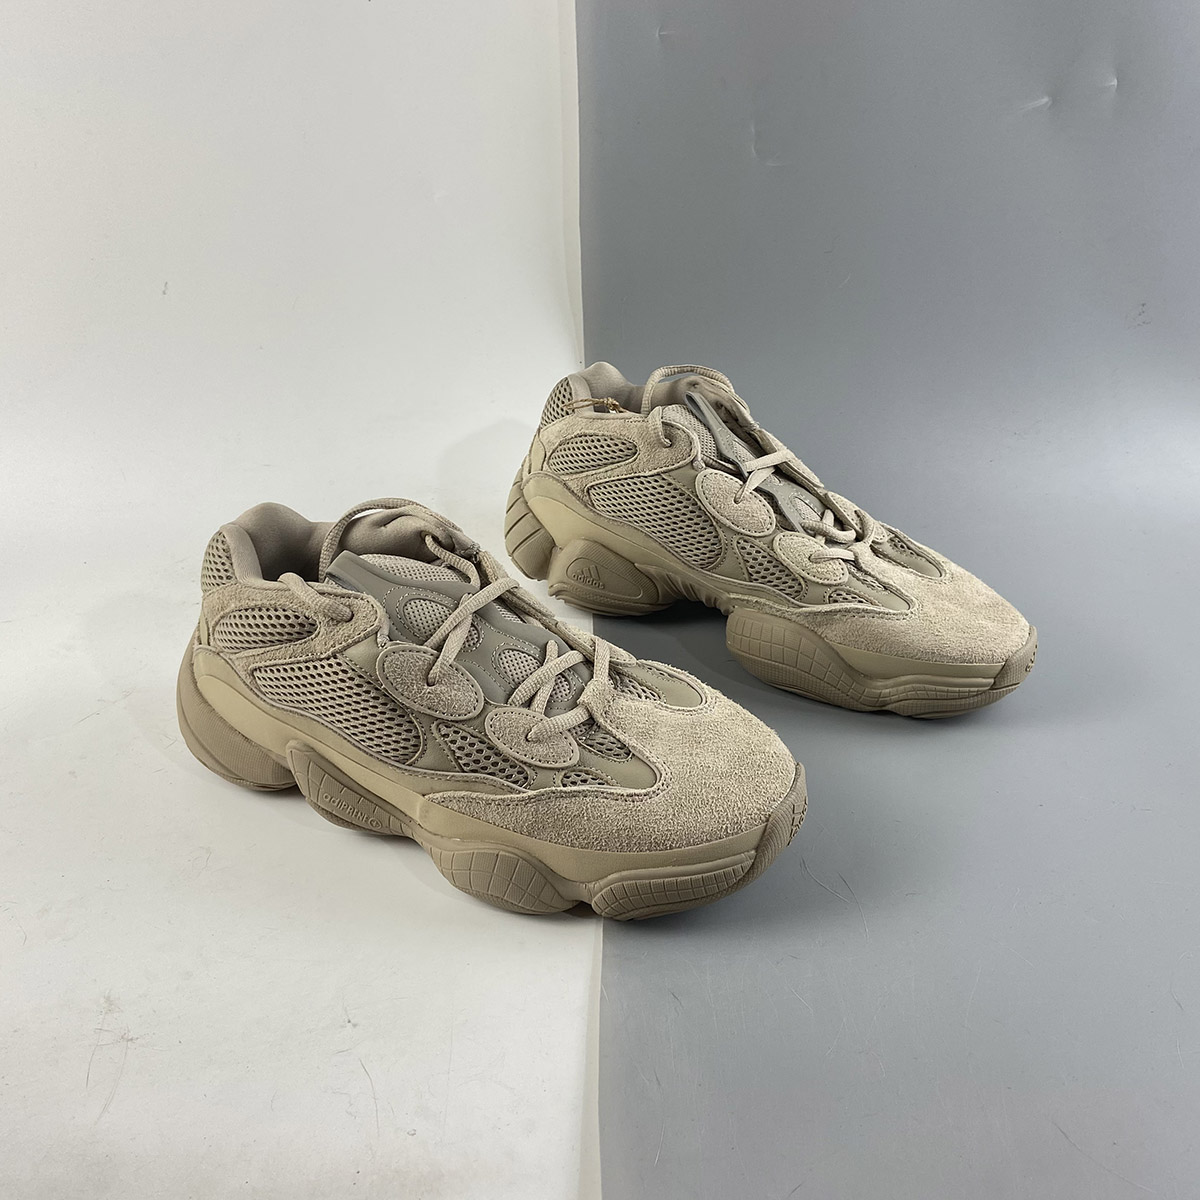 adidas Yeezy 500 “Taupe Light” GX3605 For Sale – The Sole Line